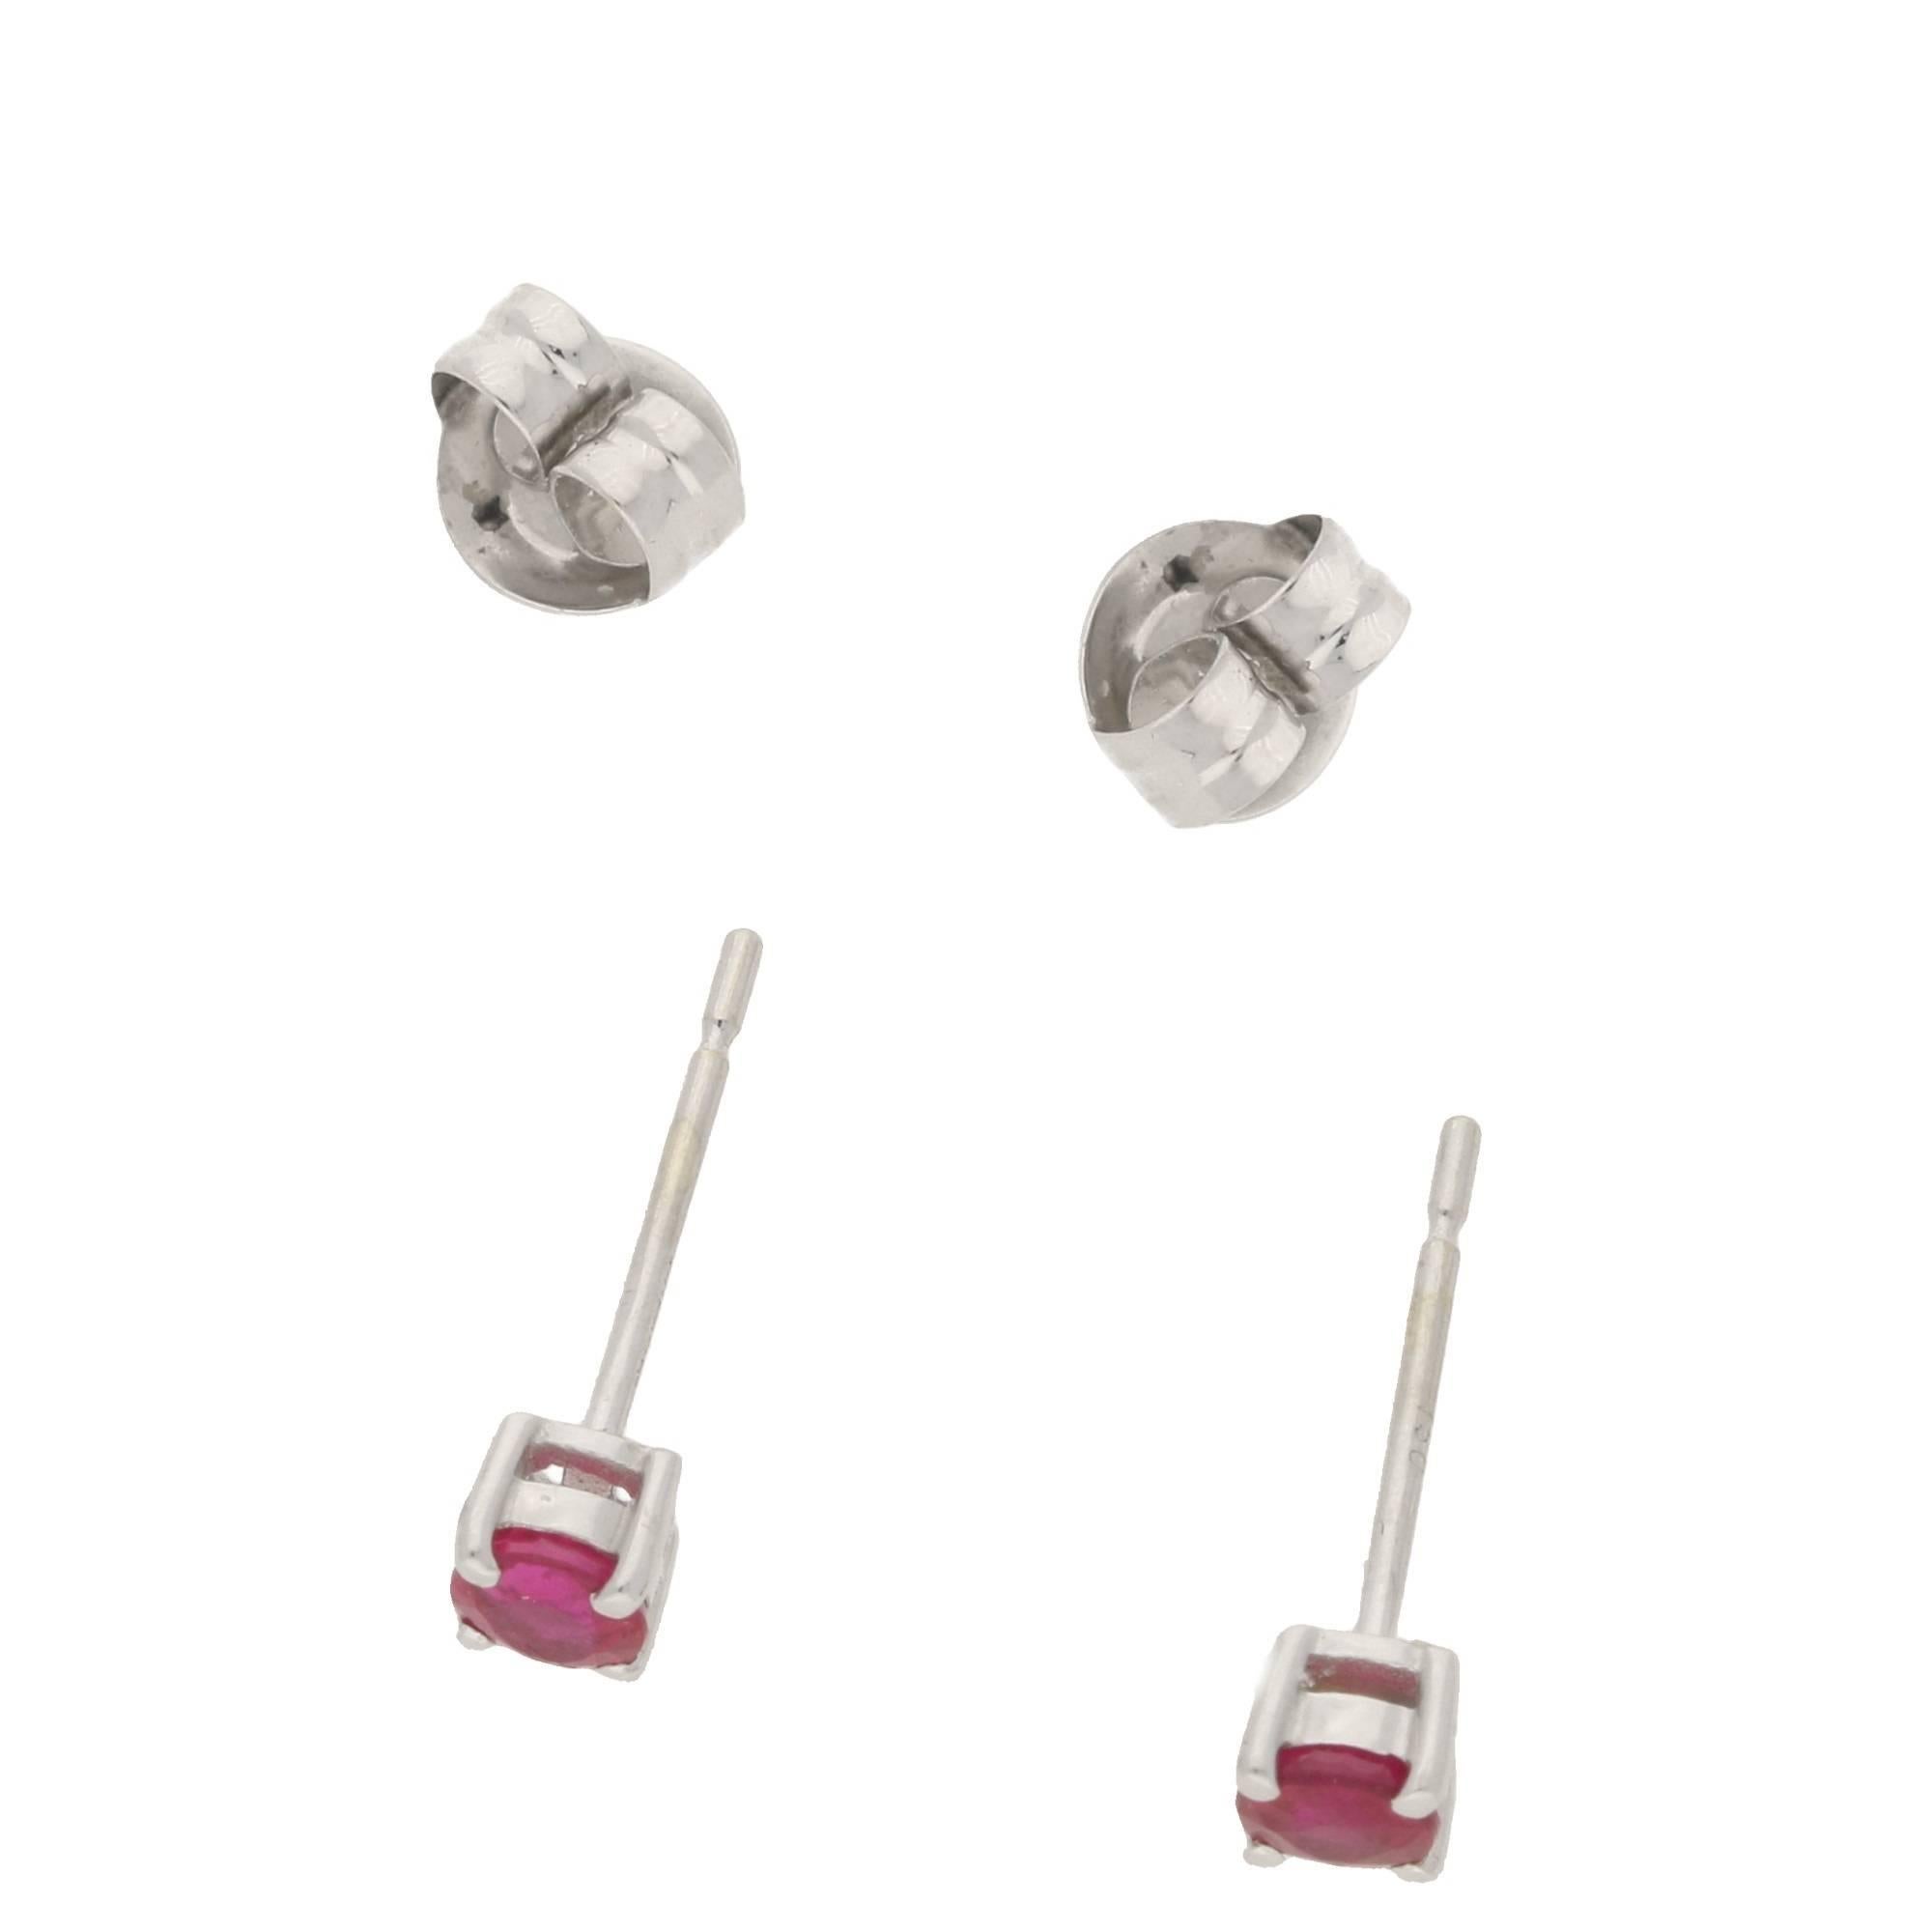 A fine pair of ruby stud earrings, totaling 0.54cts. Set in a classic 4 claw basket setting in 18ct white gold. On a post and butterfly fitting.